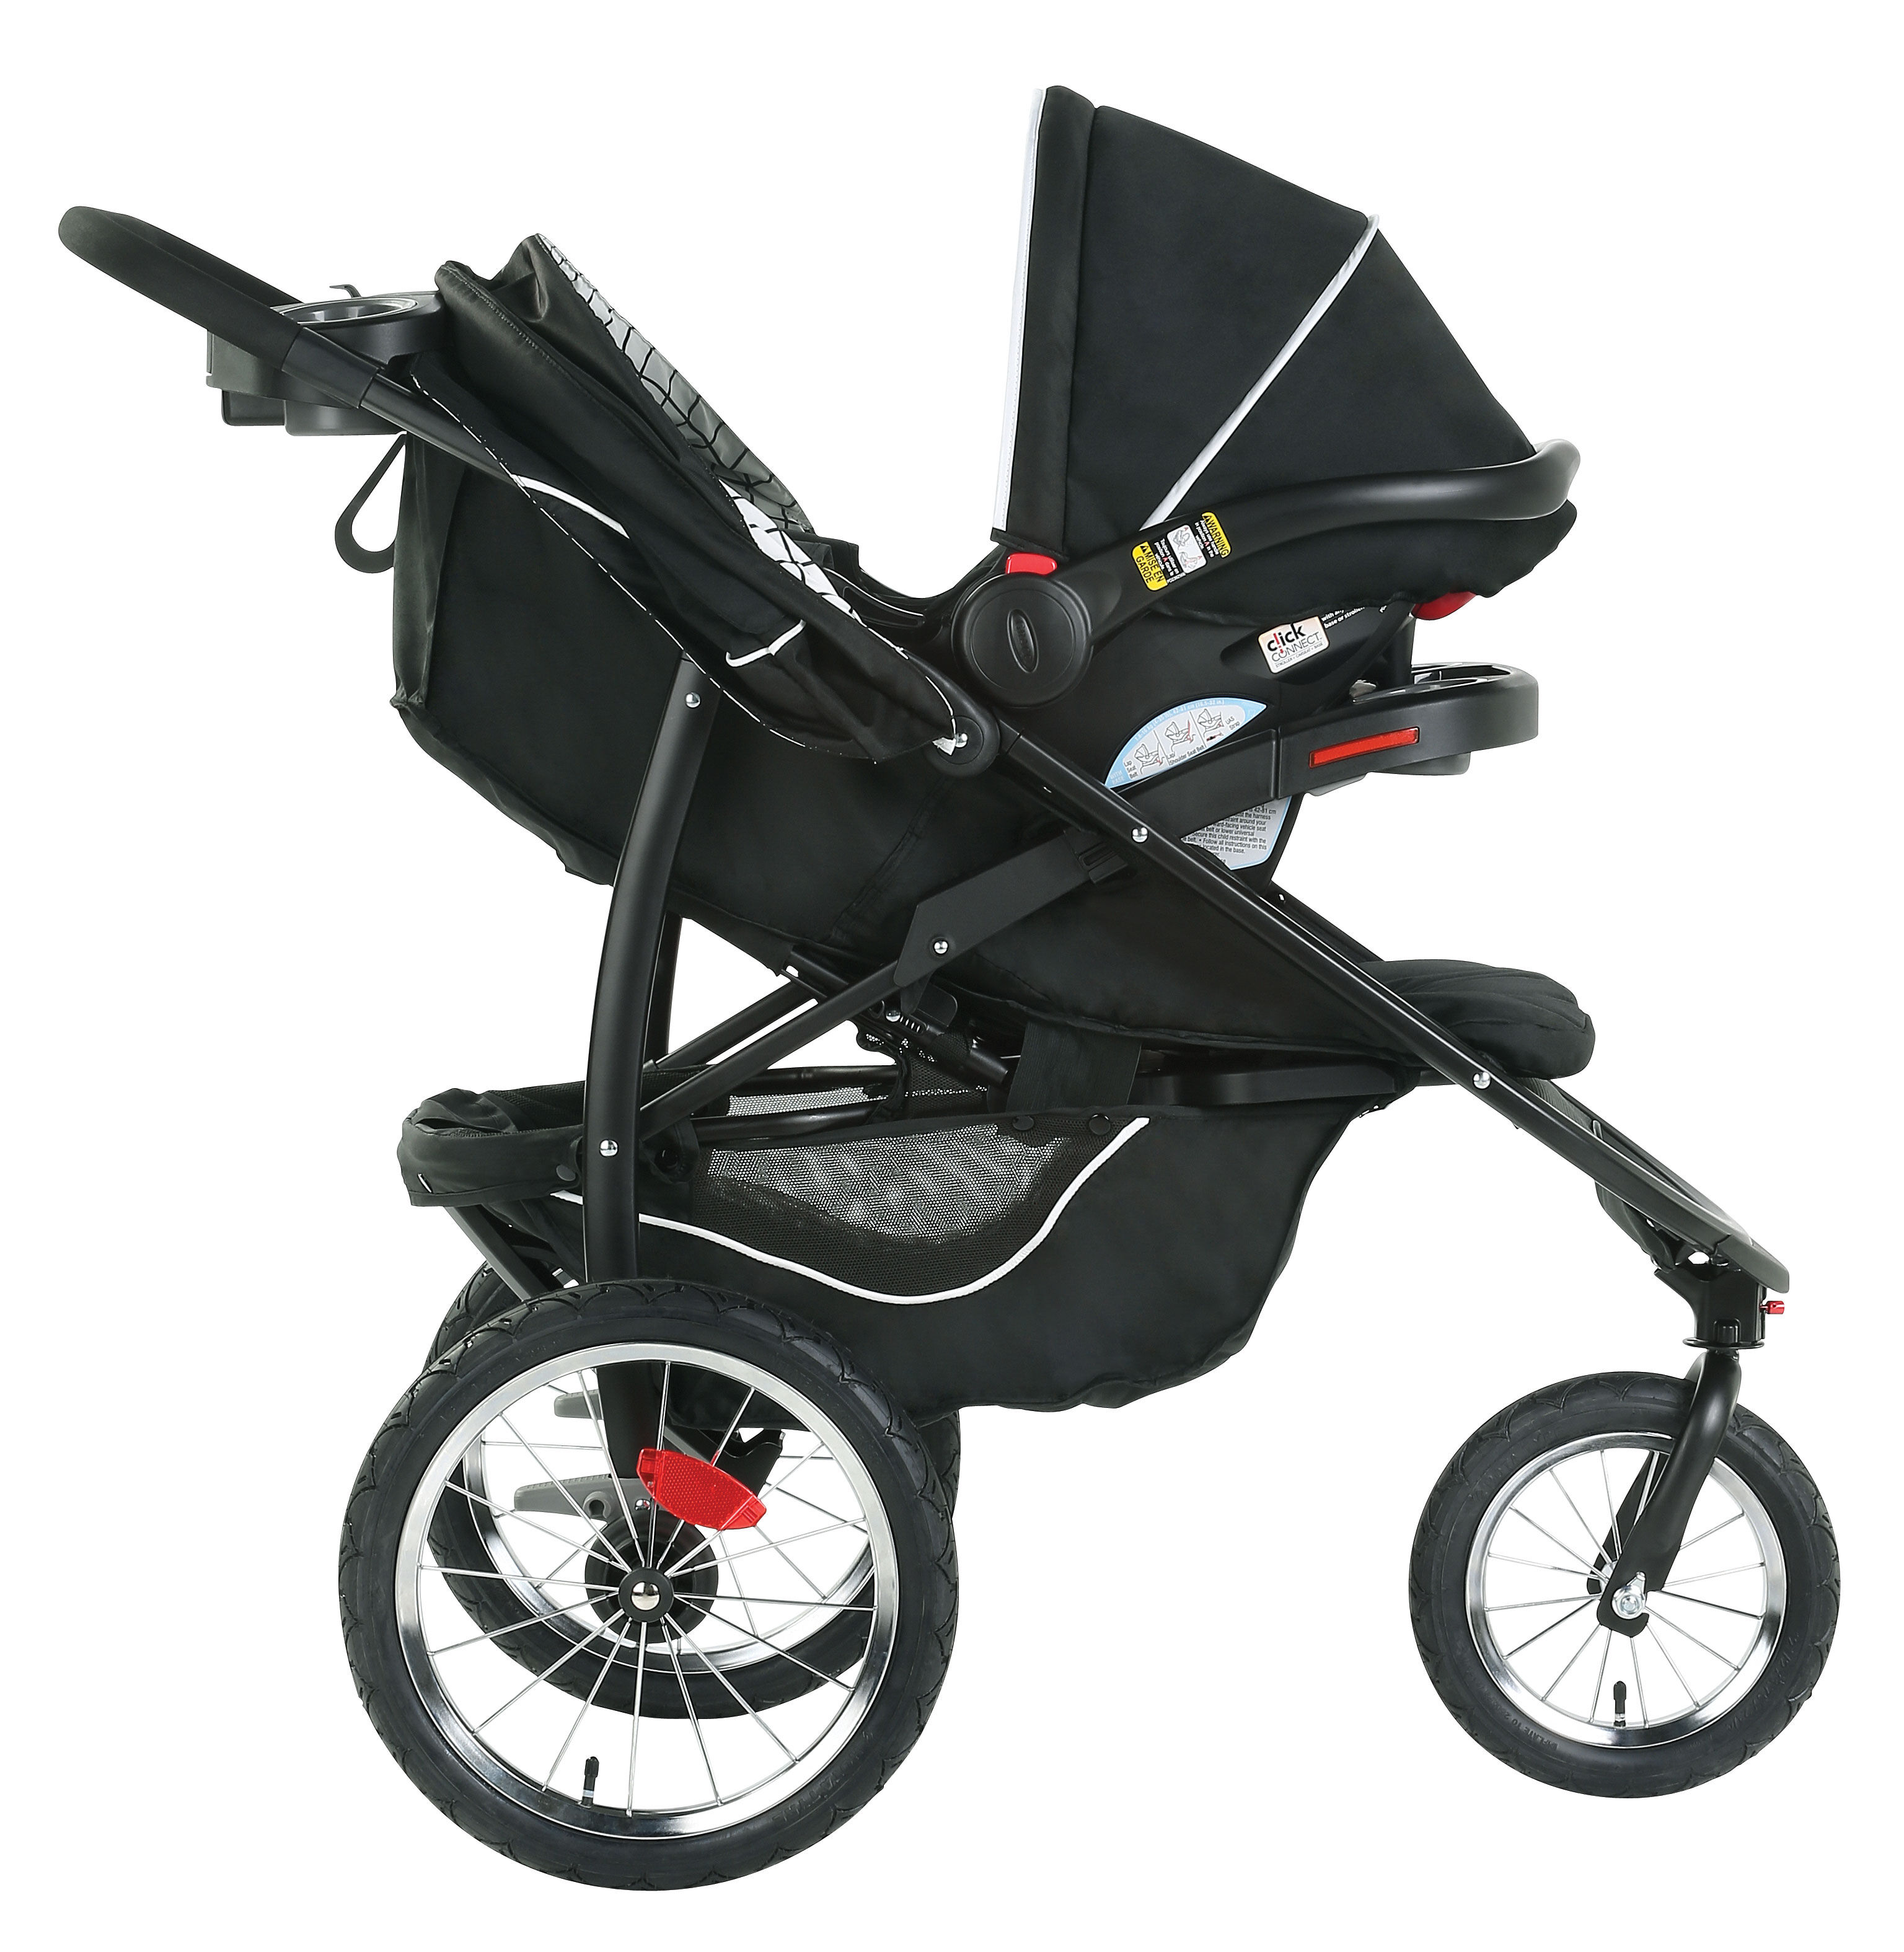 graco fastaction jogger